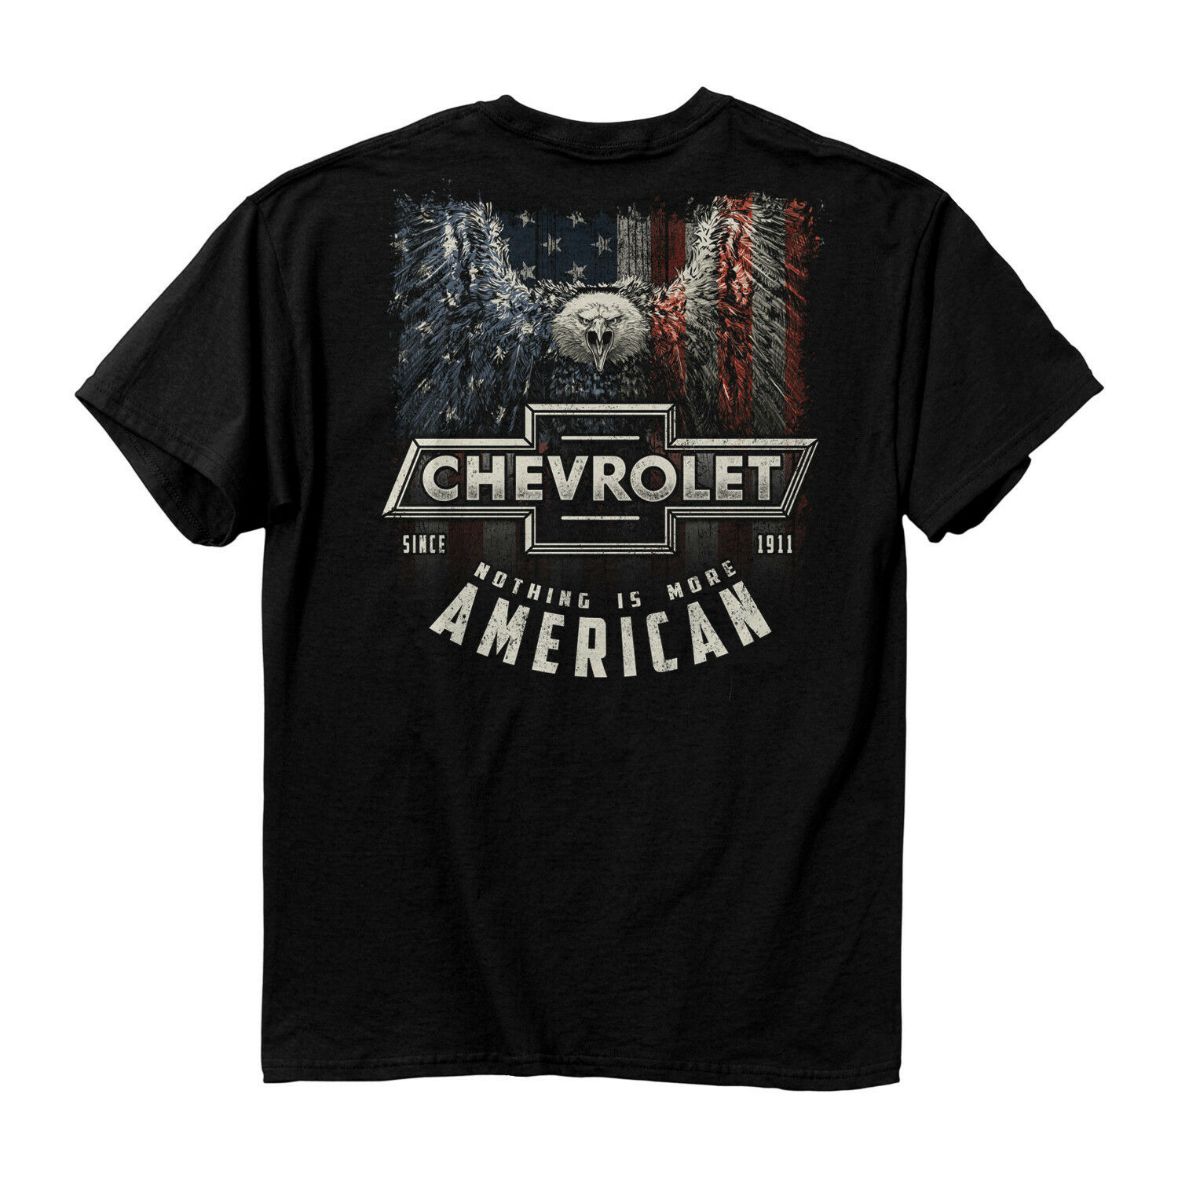 Chevy Chevrolet Nothing More American Usa Flag Bald Eagle Car Truck Shirt